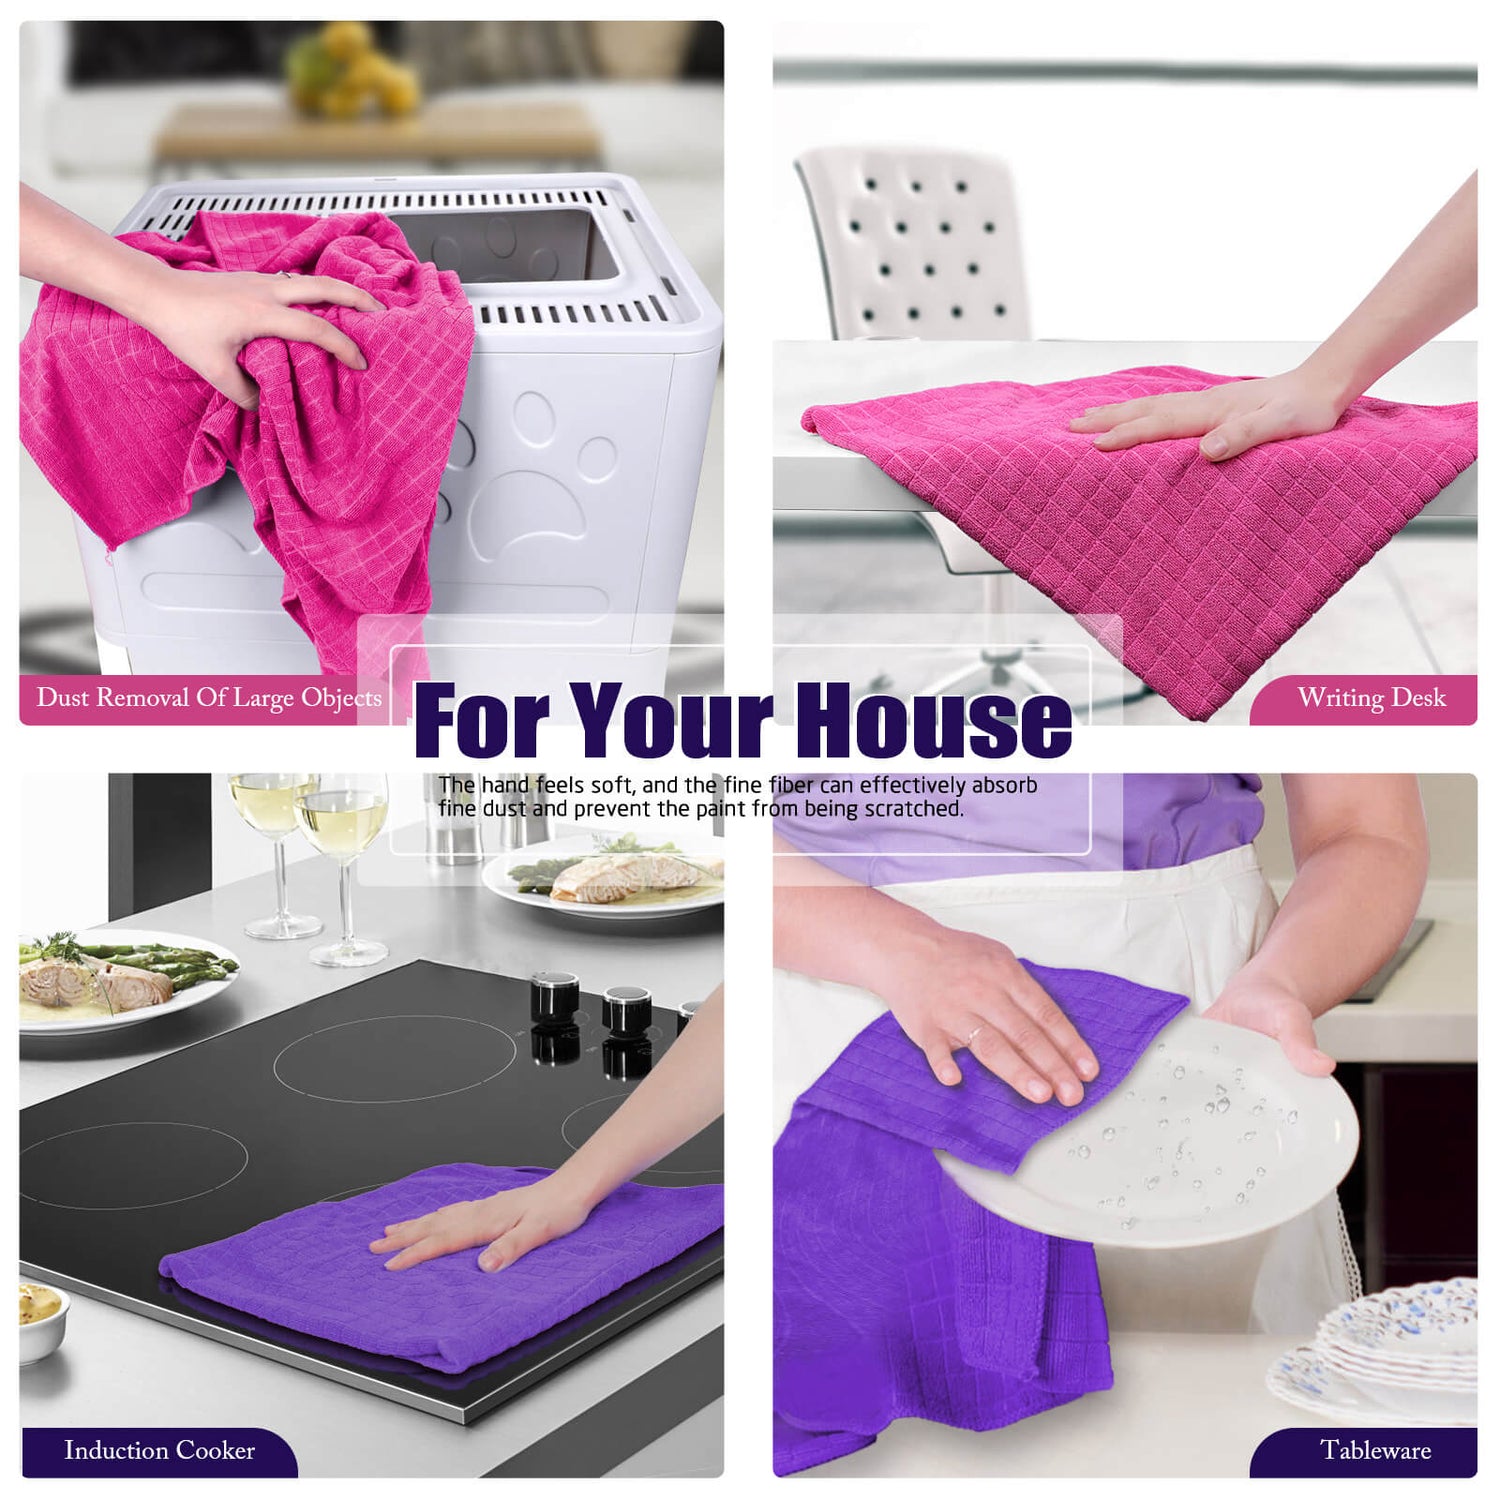 12pcs Kitchen Dish Towels, Microfiber Cleaning Cloth, Double-sided Microfiber  Towel Lint-free, Super Absorbent And Dry Quickly, Suitable For Kitchen